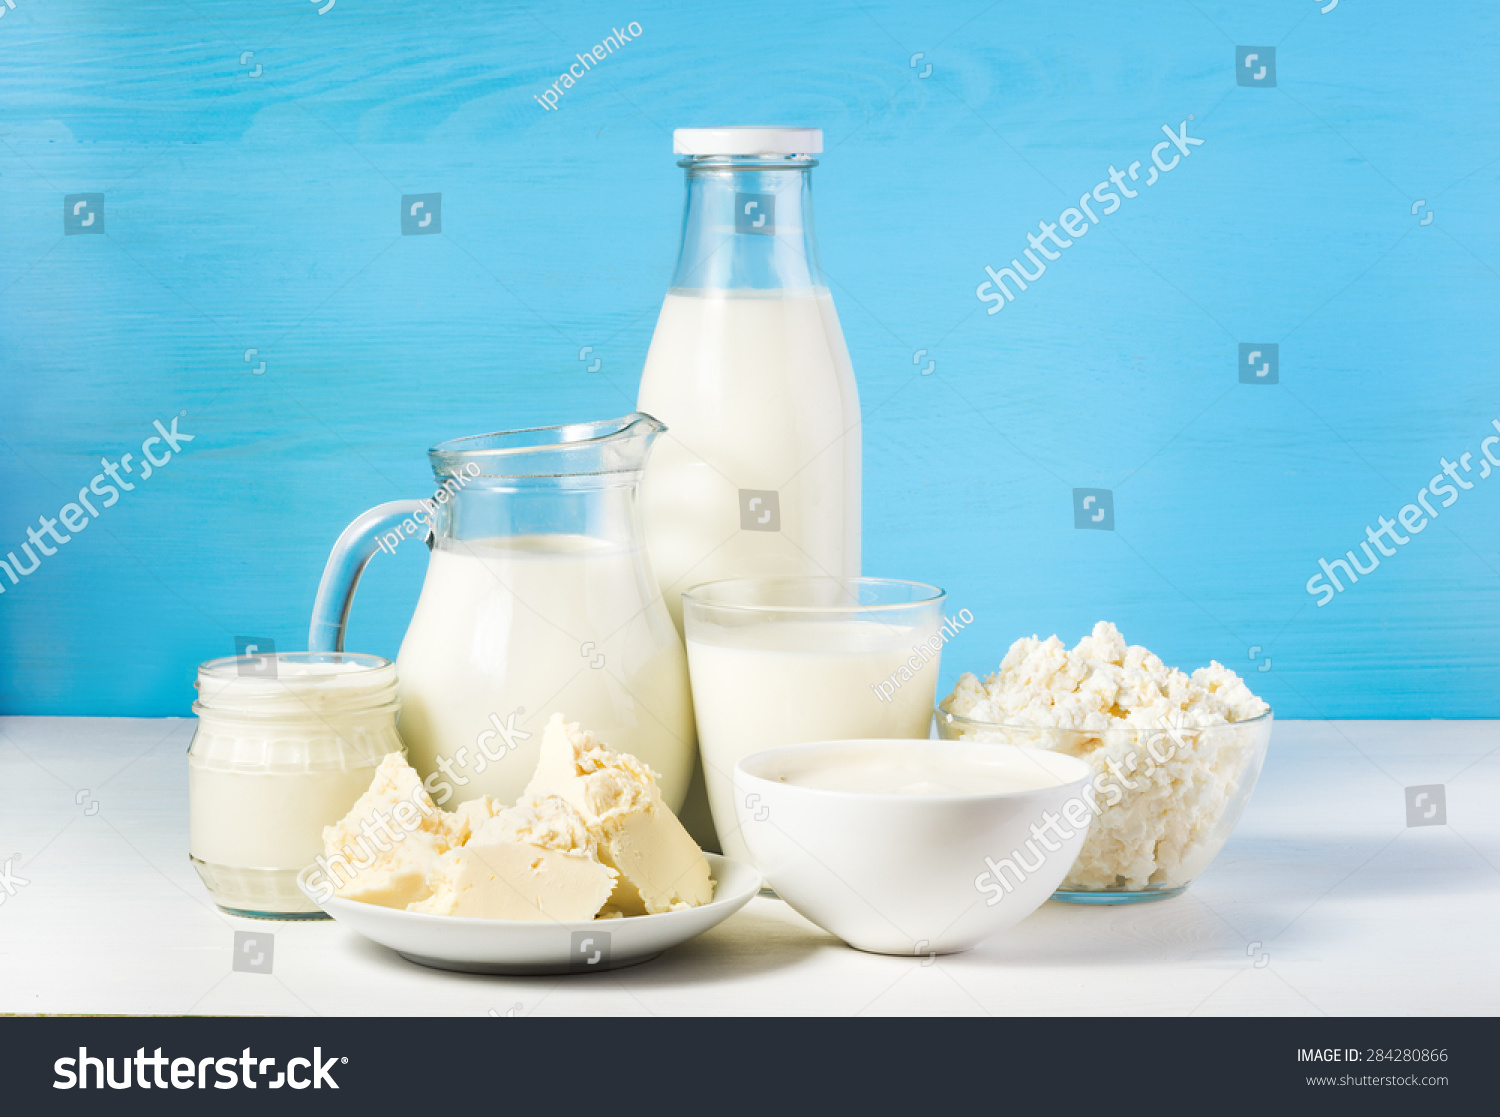 tasty healthy dairy products on a table on a blue background: sour cream in a white bowl, cottage cheese in bowl, cream in a a bank,  butter on a saucer and milk in a jar, glass bottle and in a glass #284280866